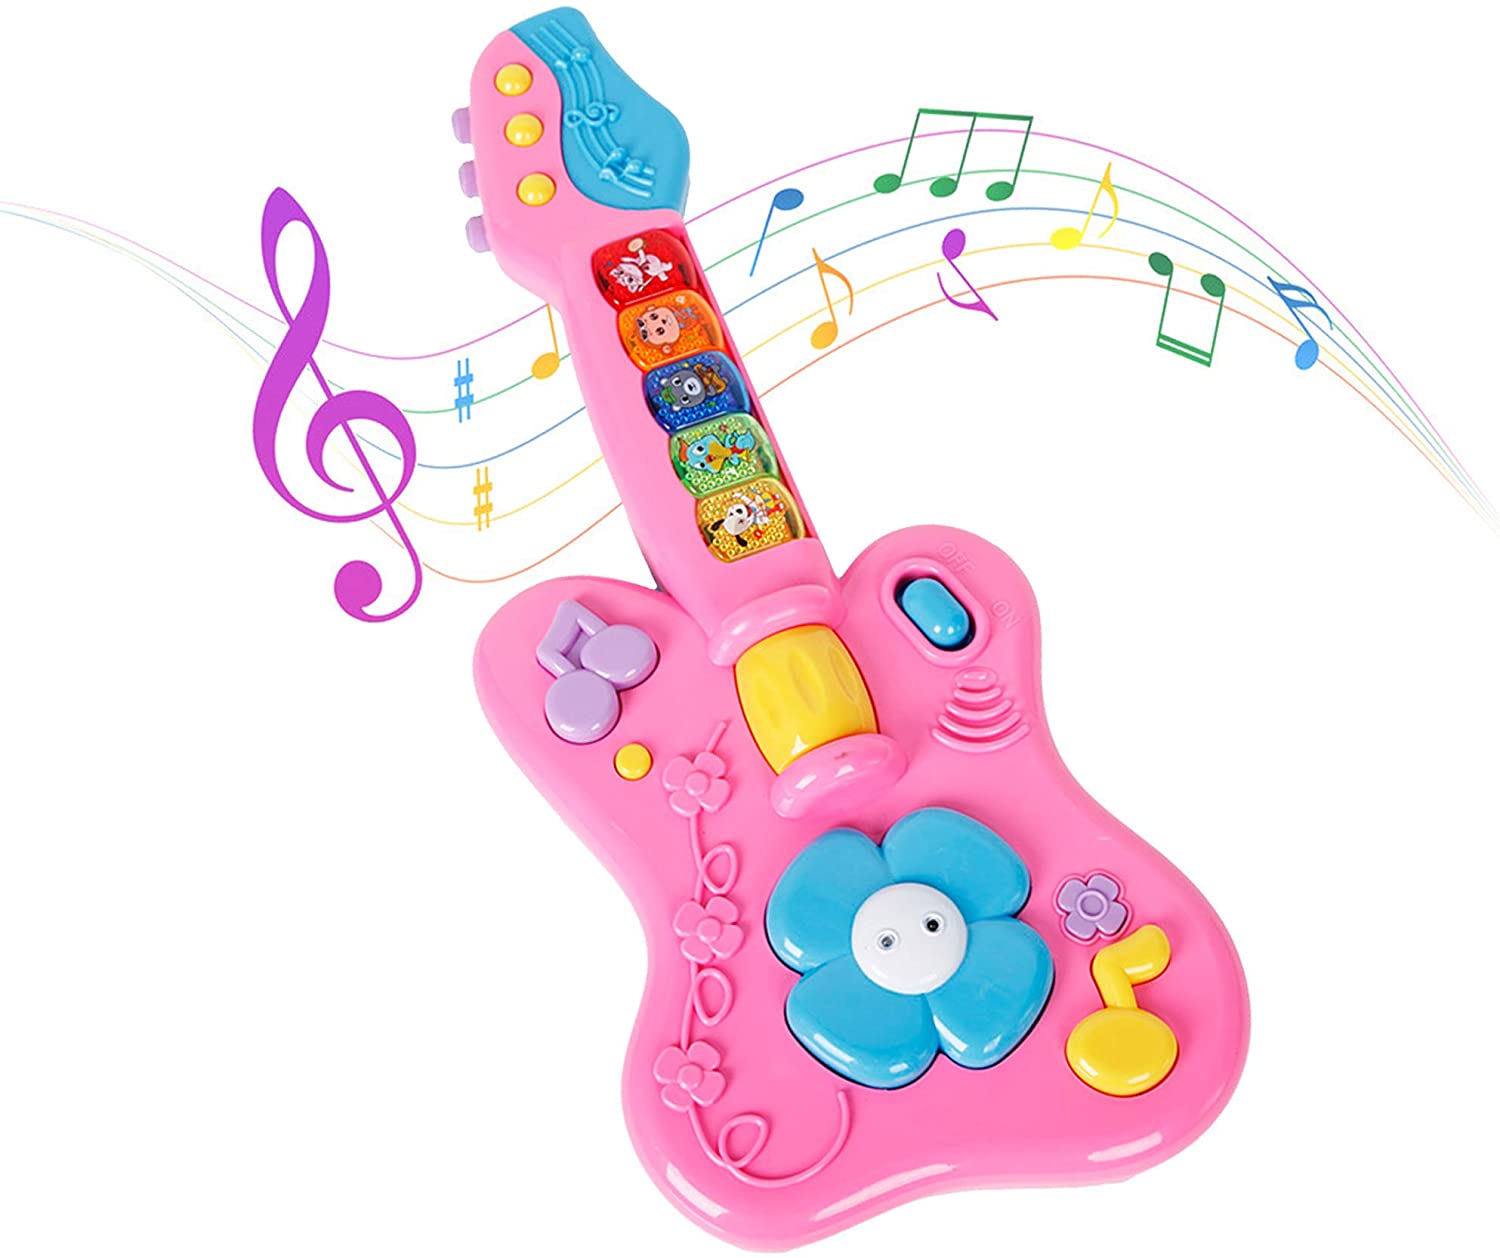 Guitar Toys for Toddler - Musical Instruments with Light and Music - Kids Preschool Early Education Play Toy for Boys Girls - Ages 12 Months and Up